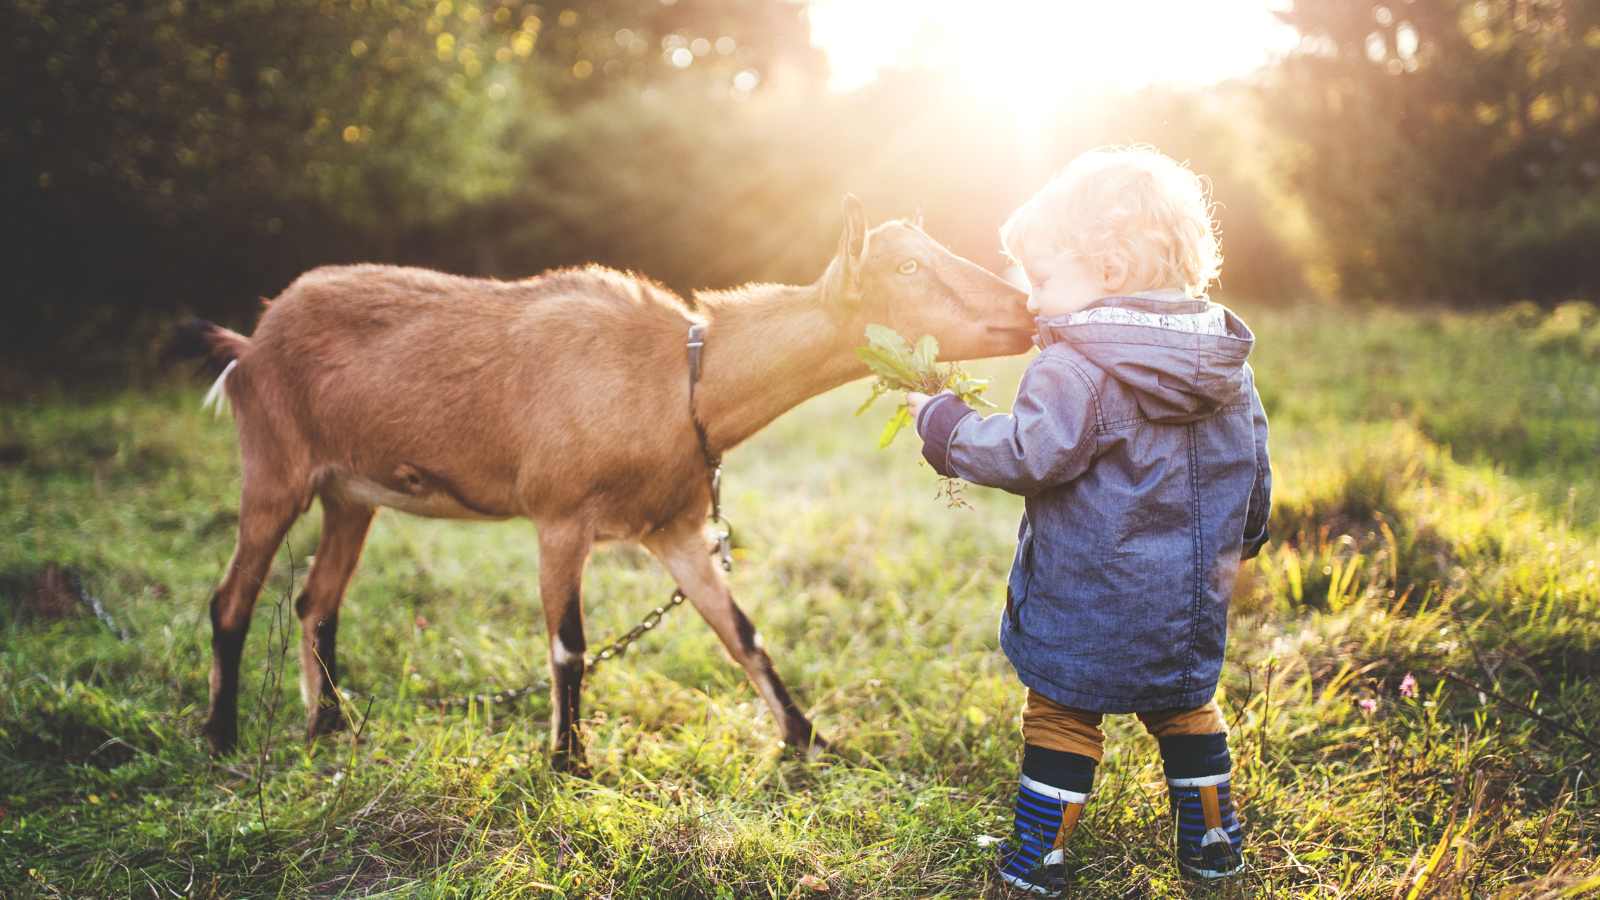 A blonde toddler boy pets a brown goat in a field.